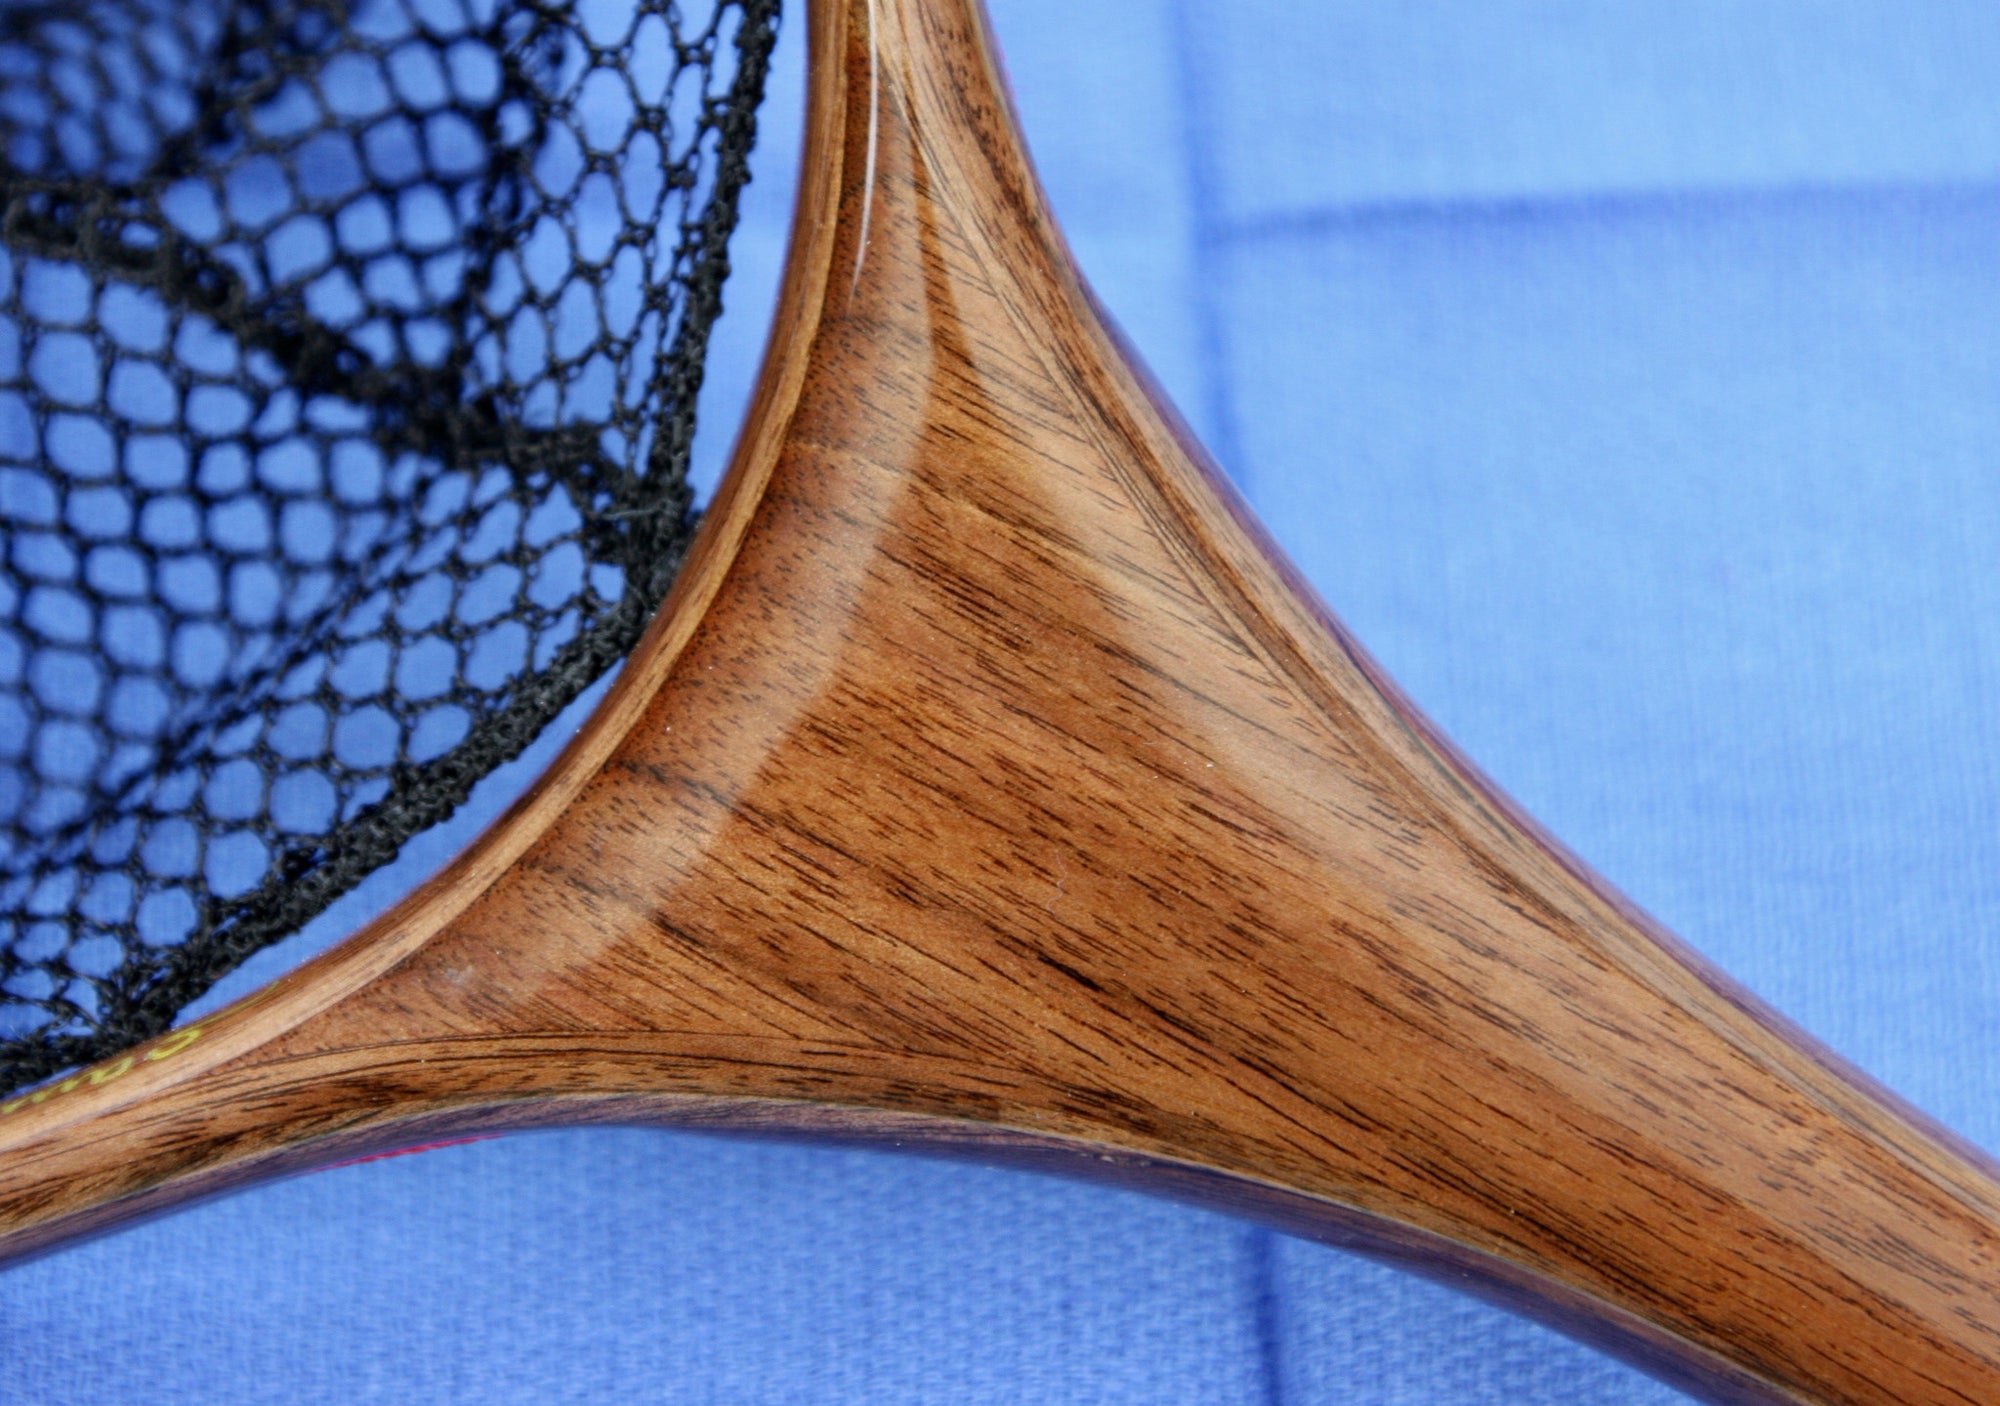 Close up of landing net handle with dark colored wood.